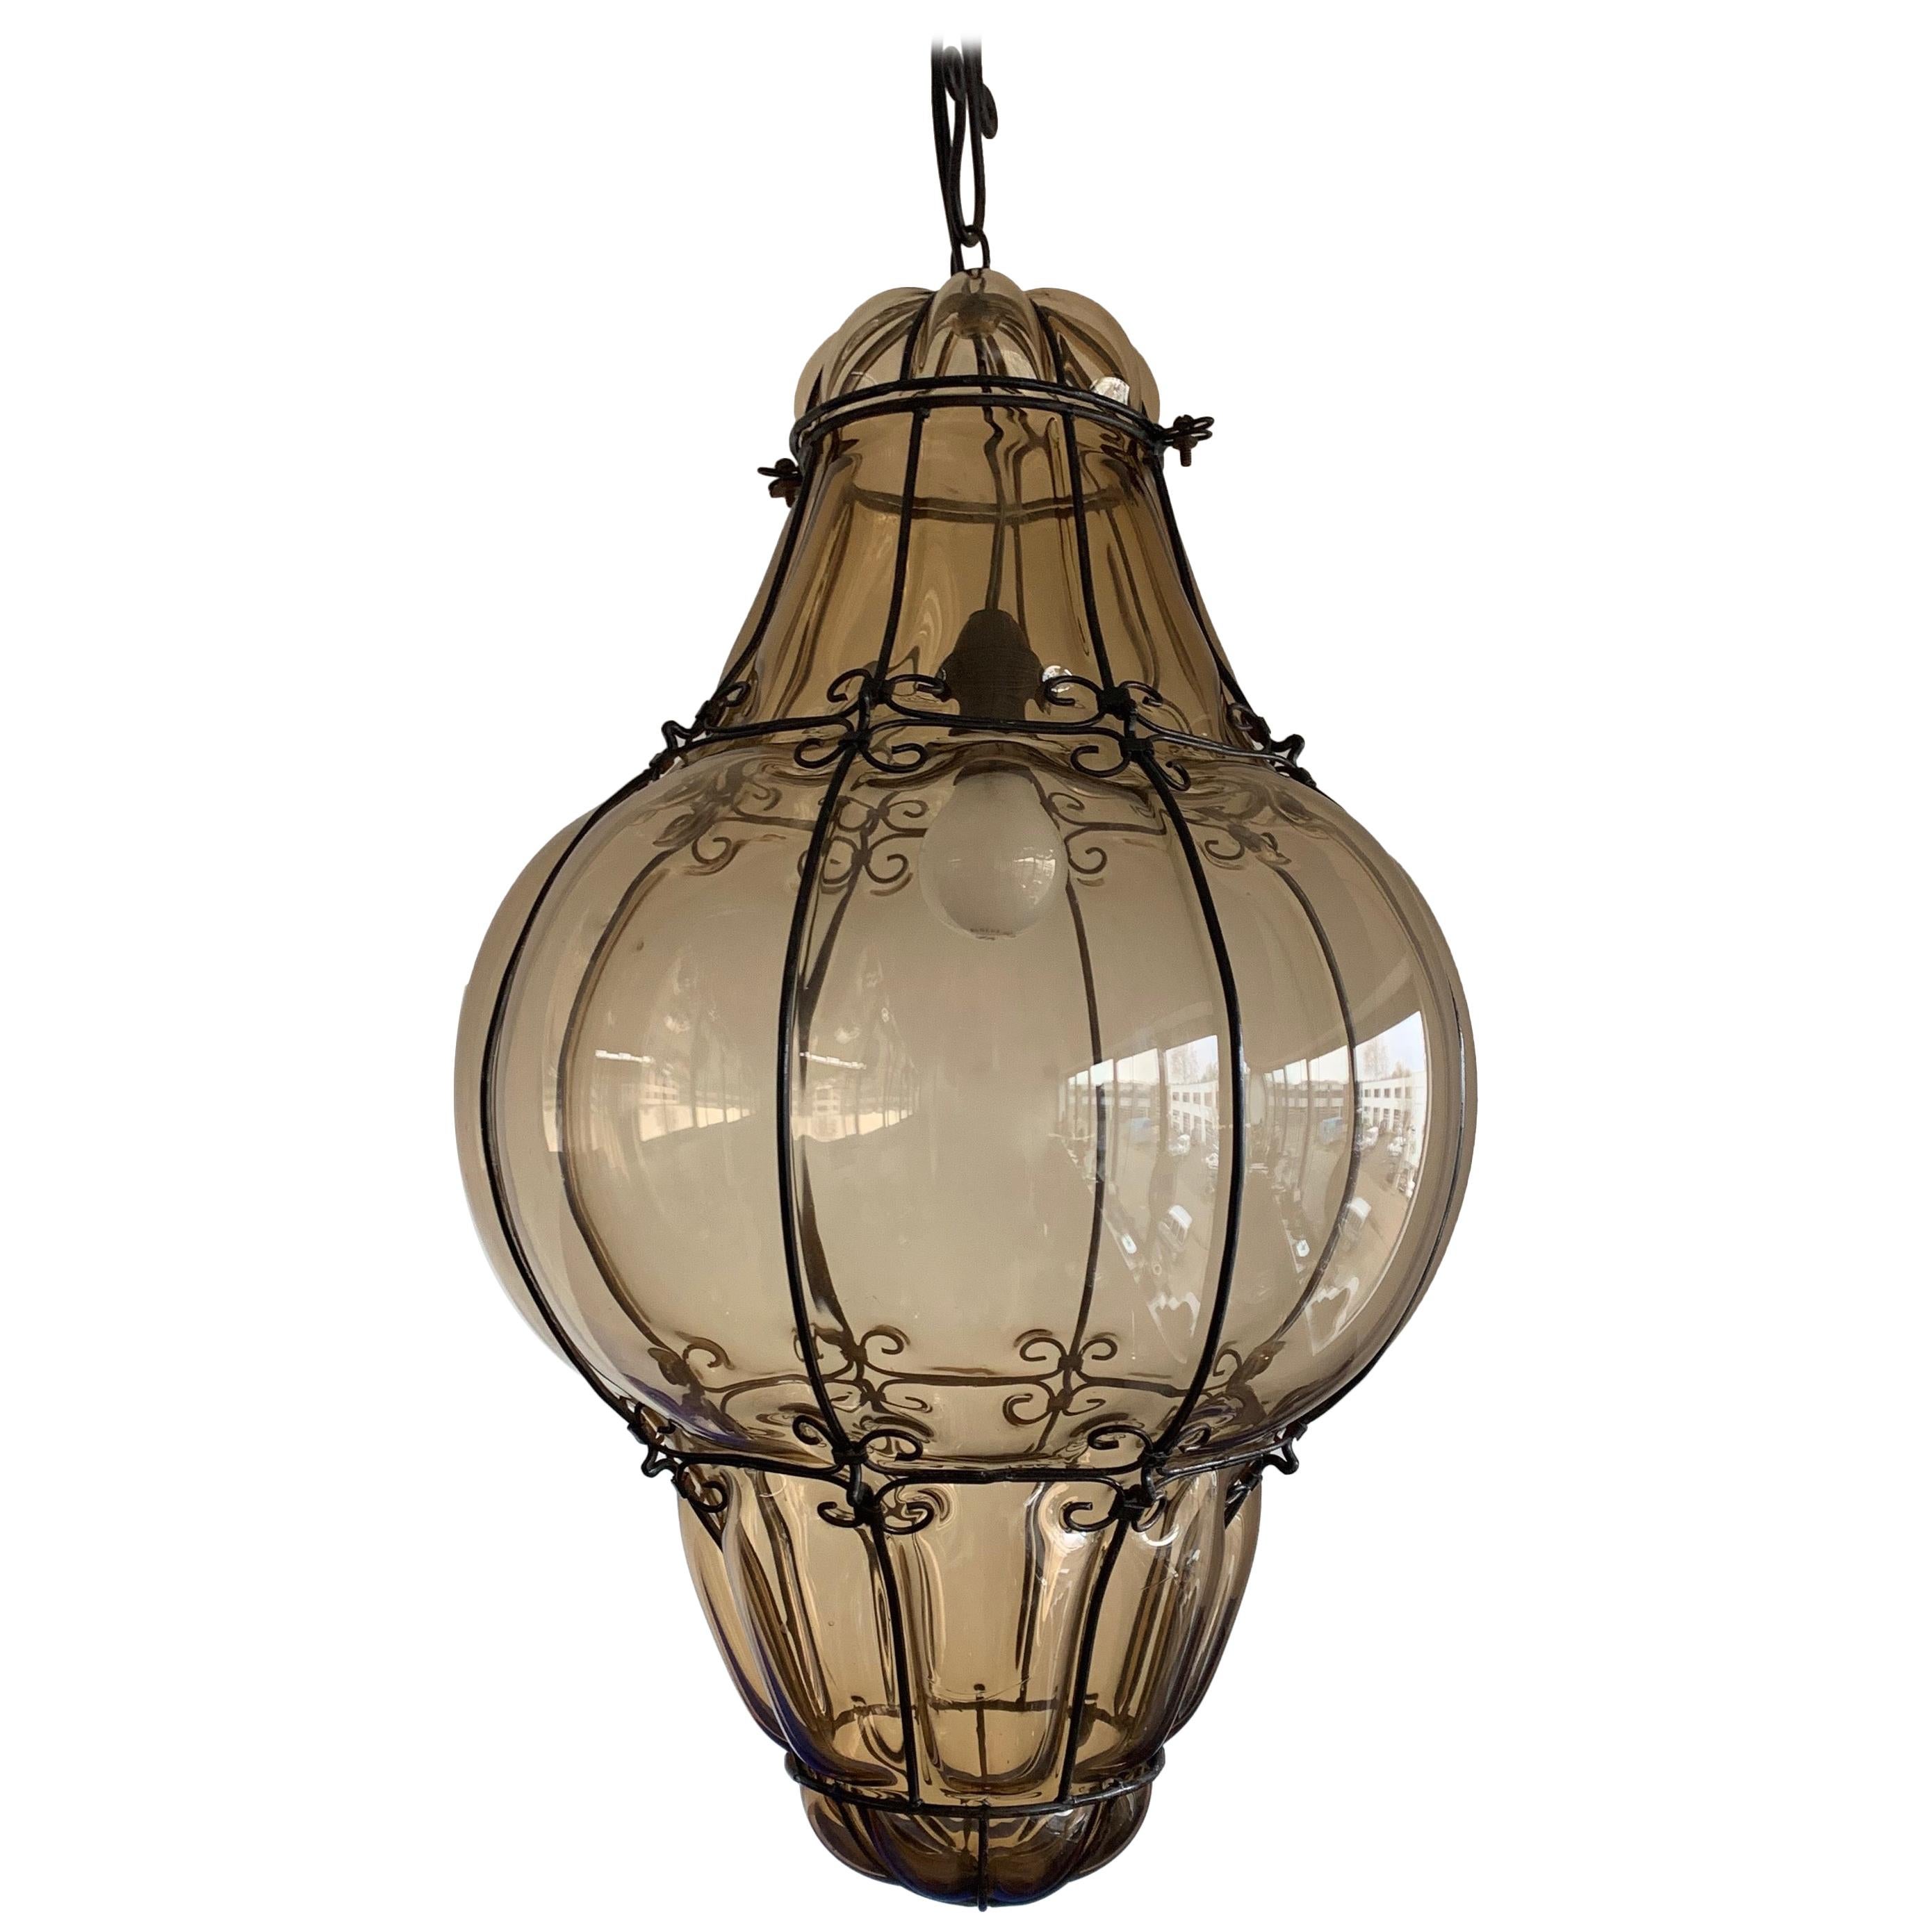 Extra large, Italian Murano mouth blown chandelier.

To give you a better idea of the extra large and wonderful size of this striking, smoked glass fixture we have added image 7 and 8 where it is put on a serving table and placed in a large lounge